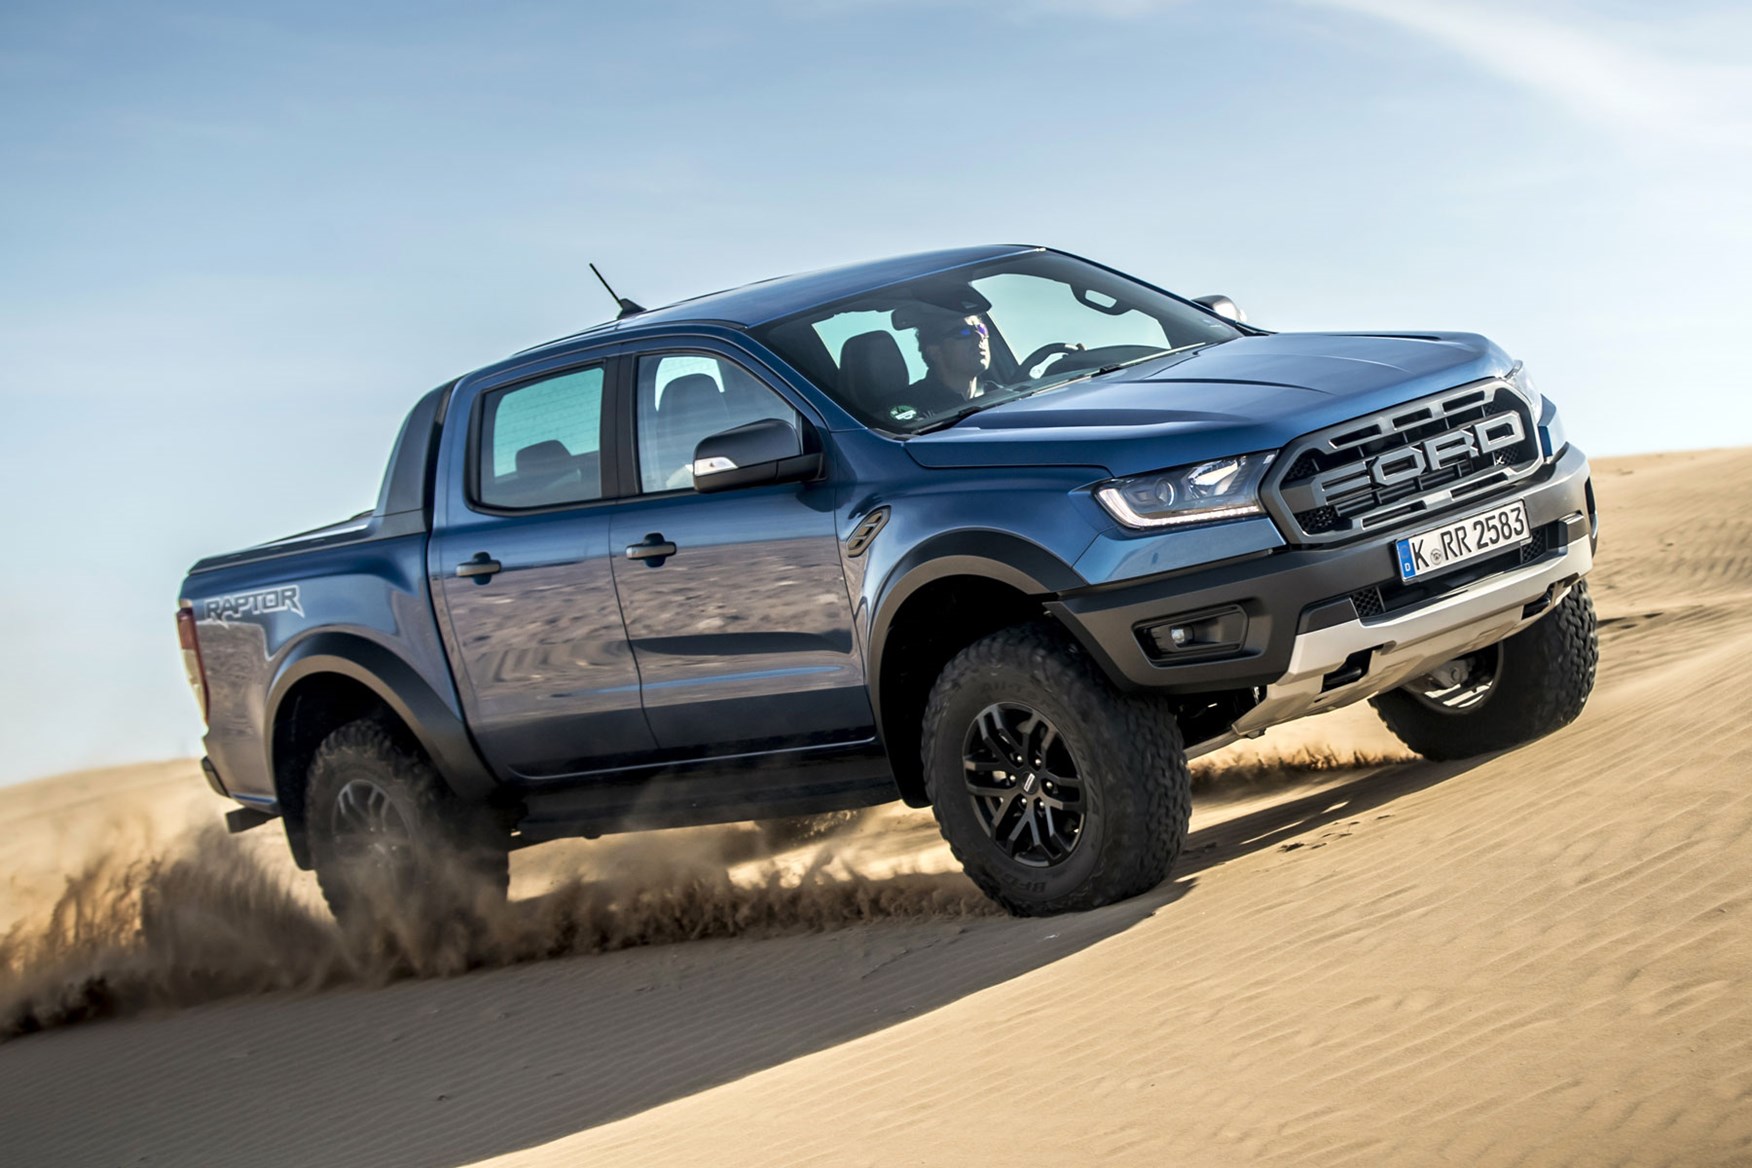 Ford Ranger Raptor review - high-performance off-road pickup tested in ...